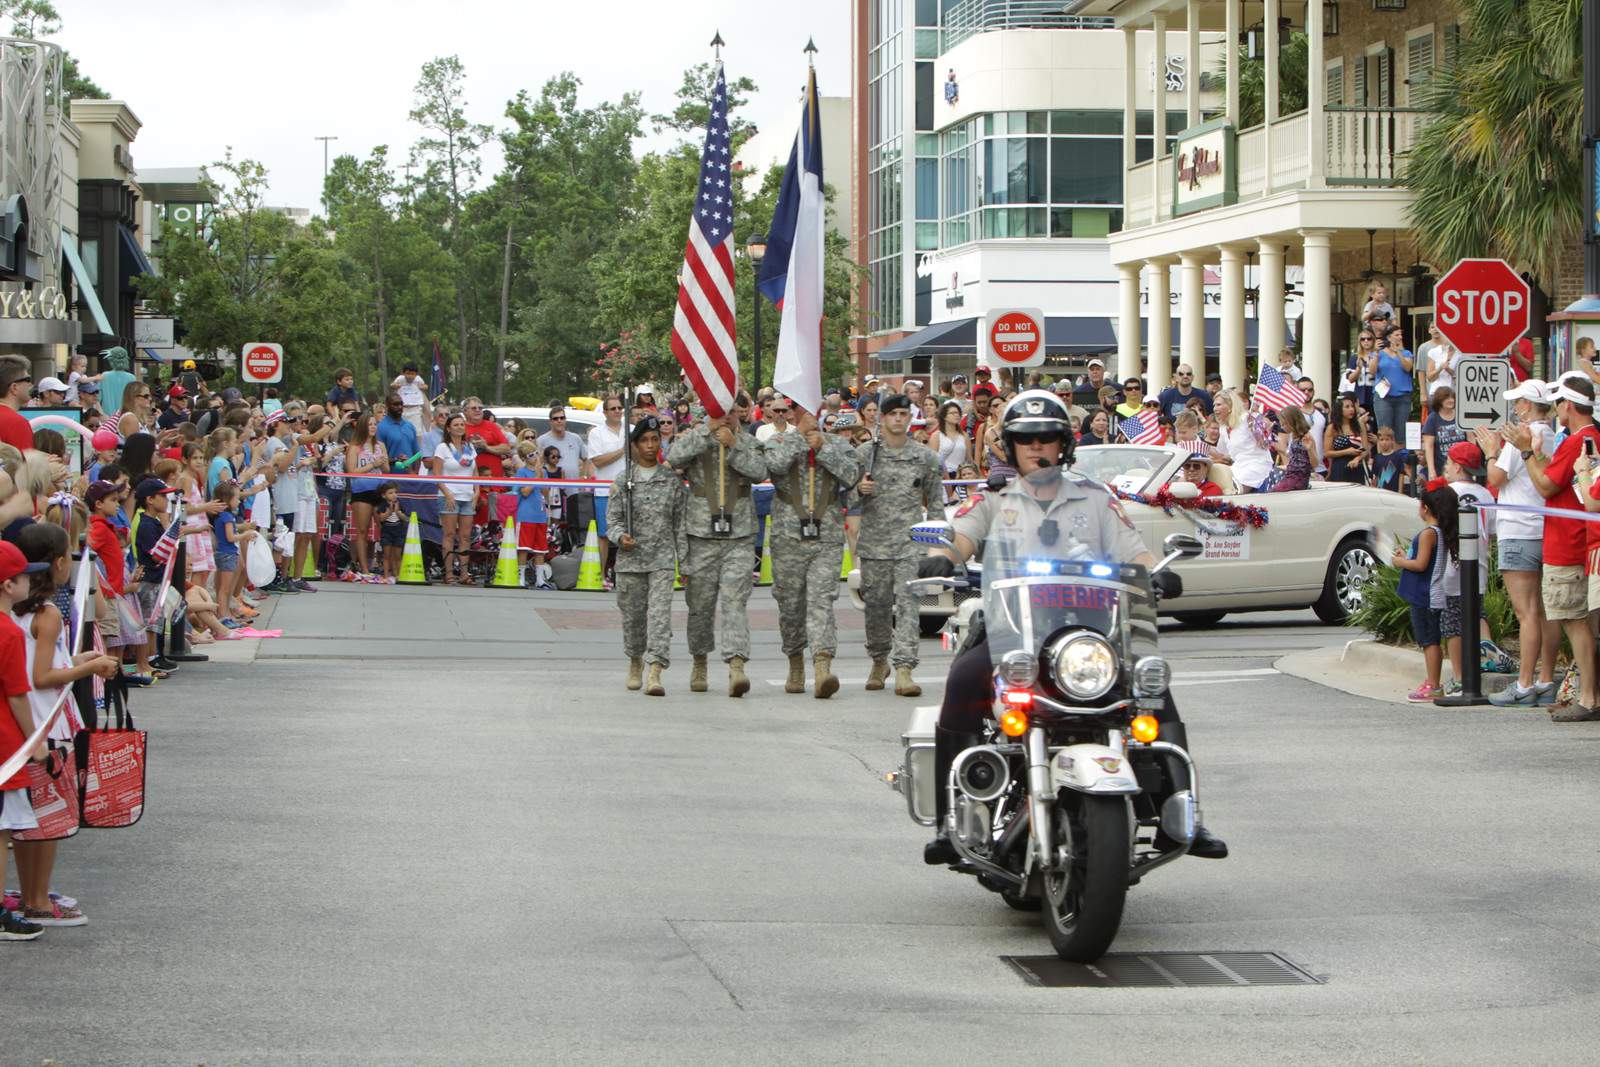 South County 4th of July parade canceled in The Woodlands for 2020 due to COVID-19 concerns